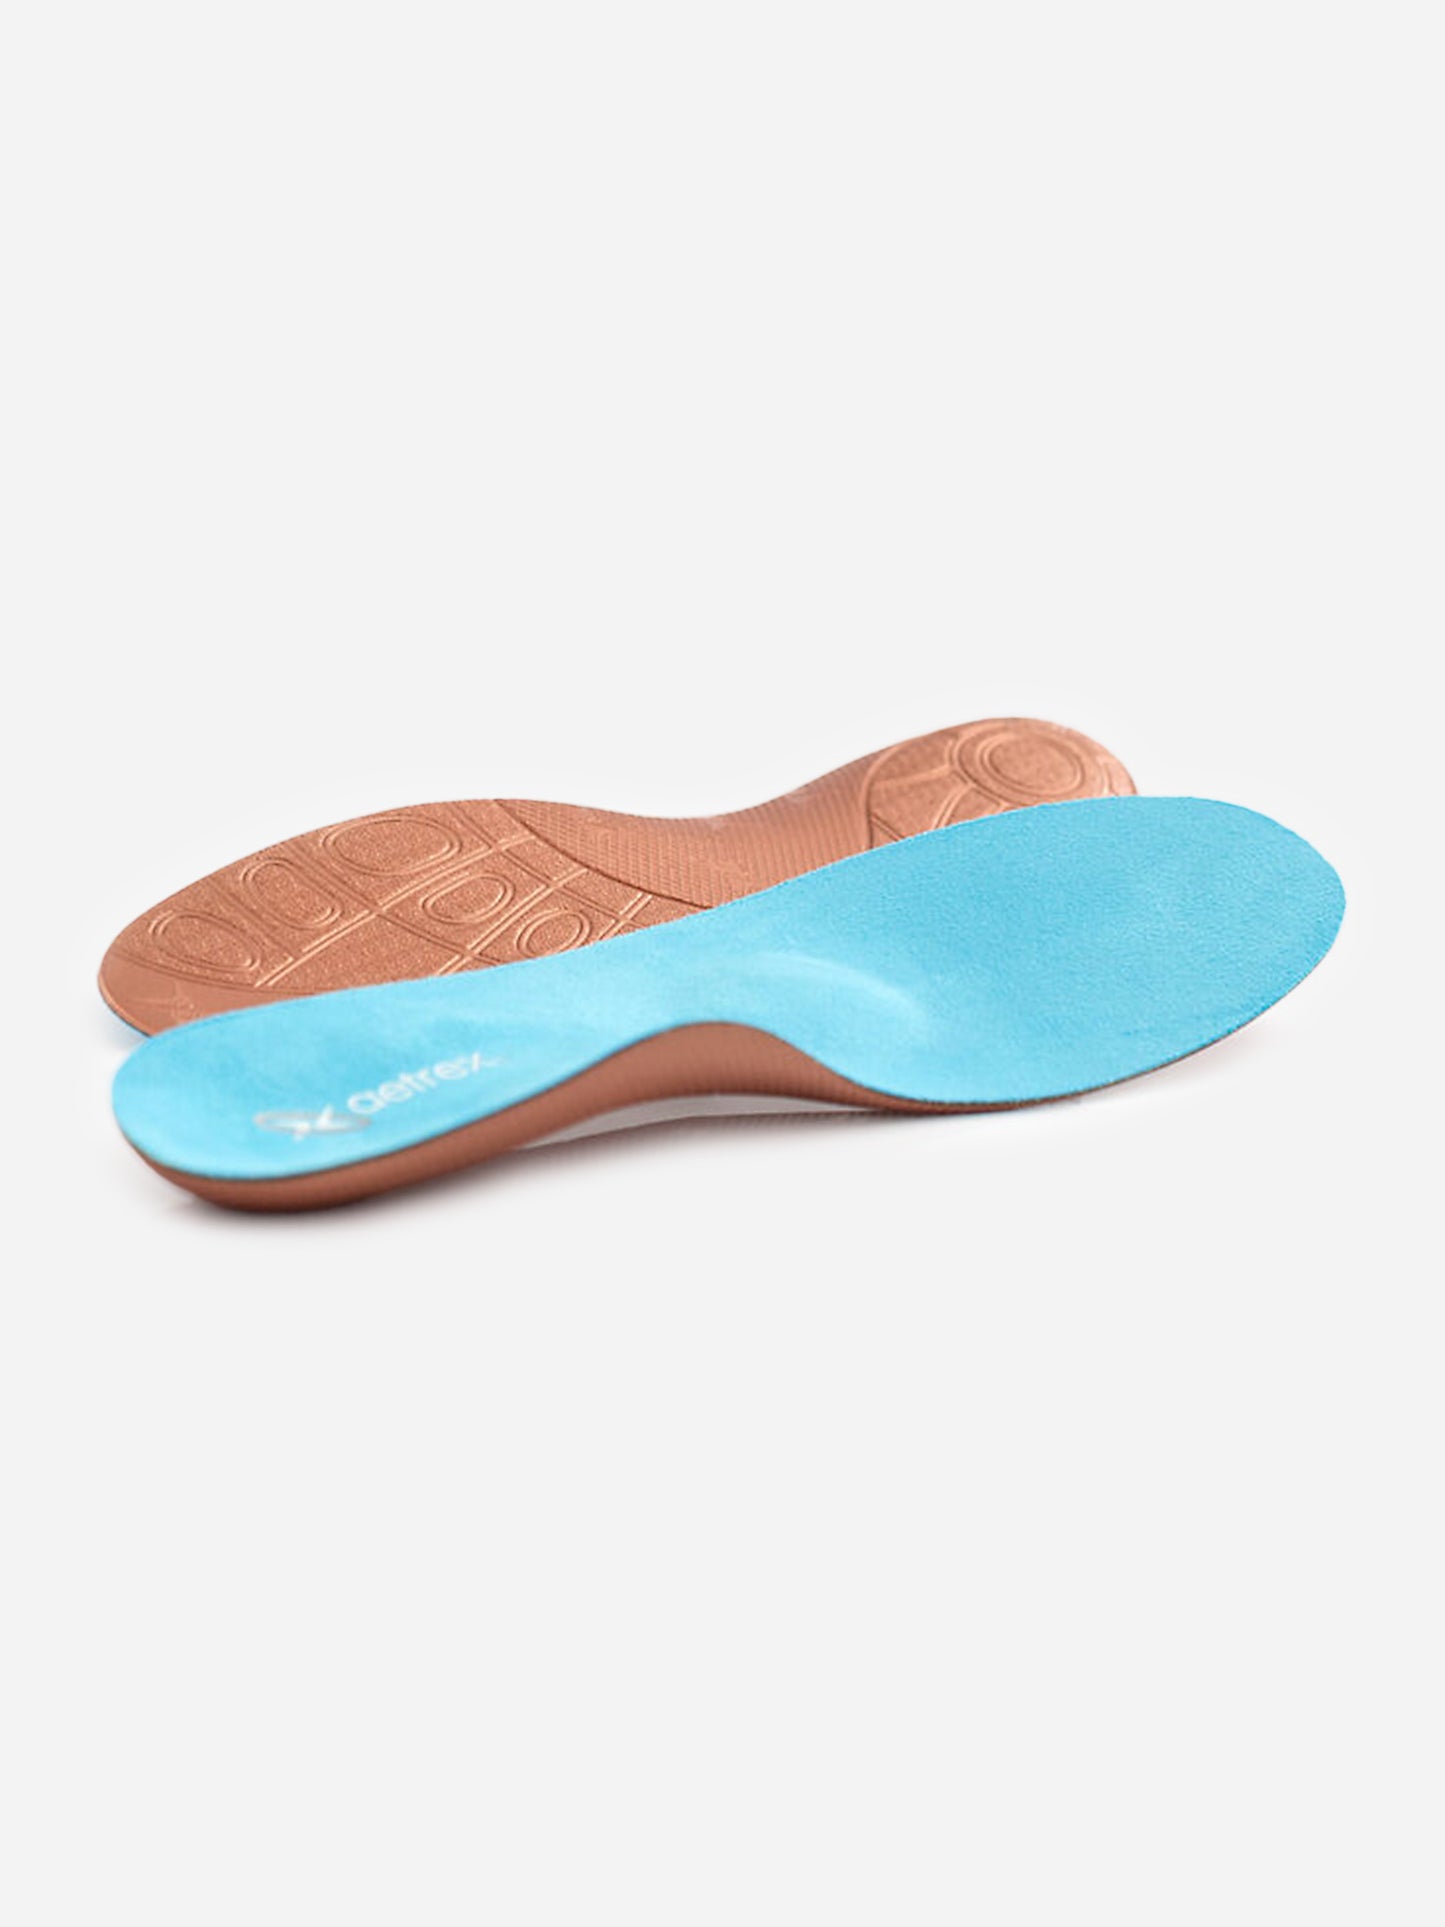 Aetrex Thinsoles Orthotics Insole + Metatarsal Support